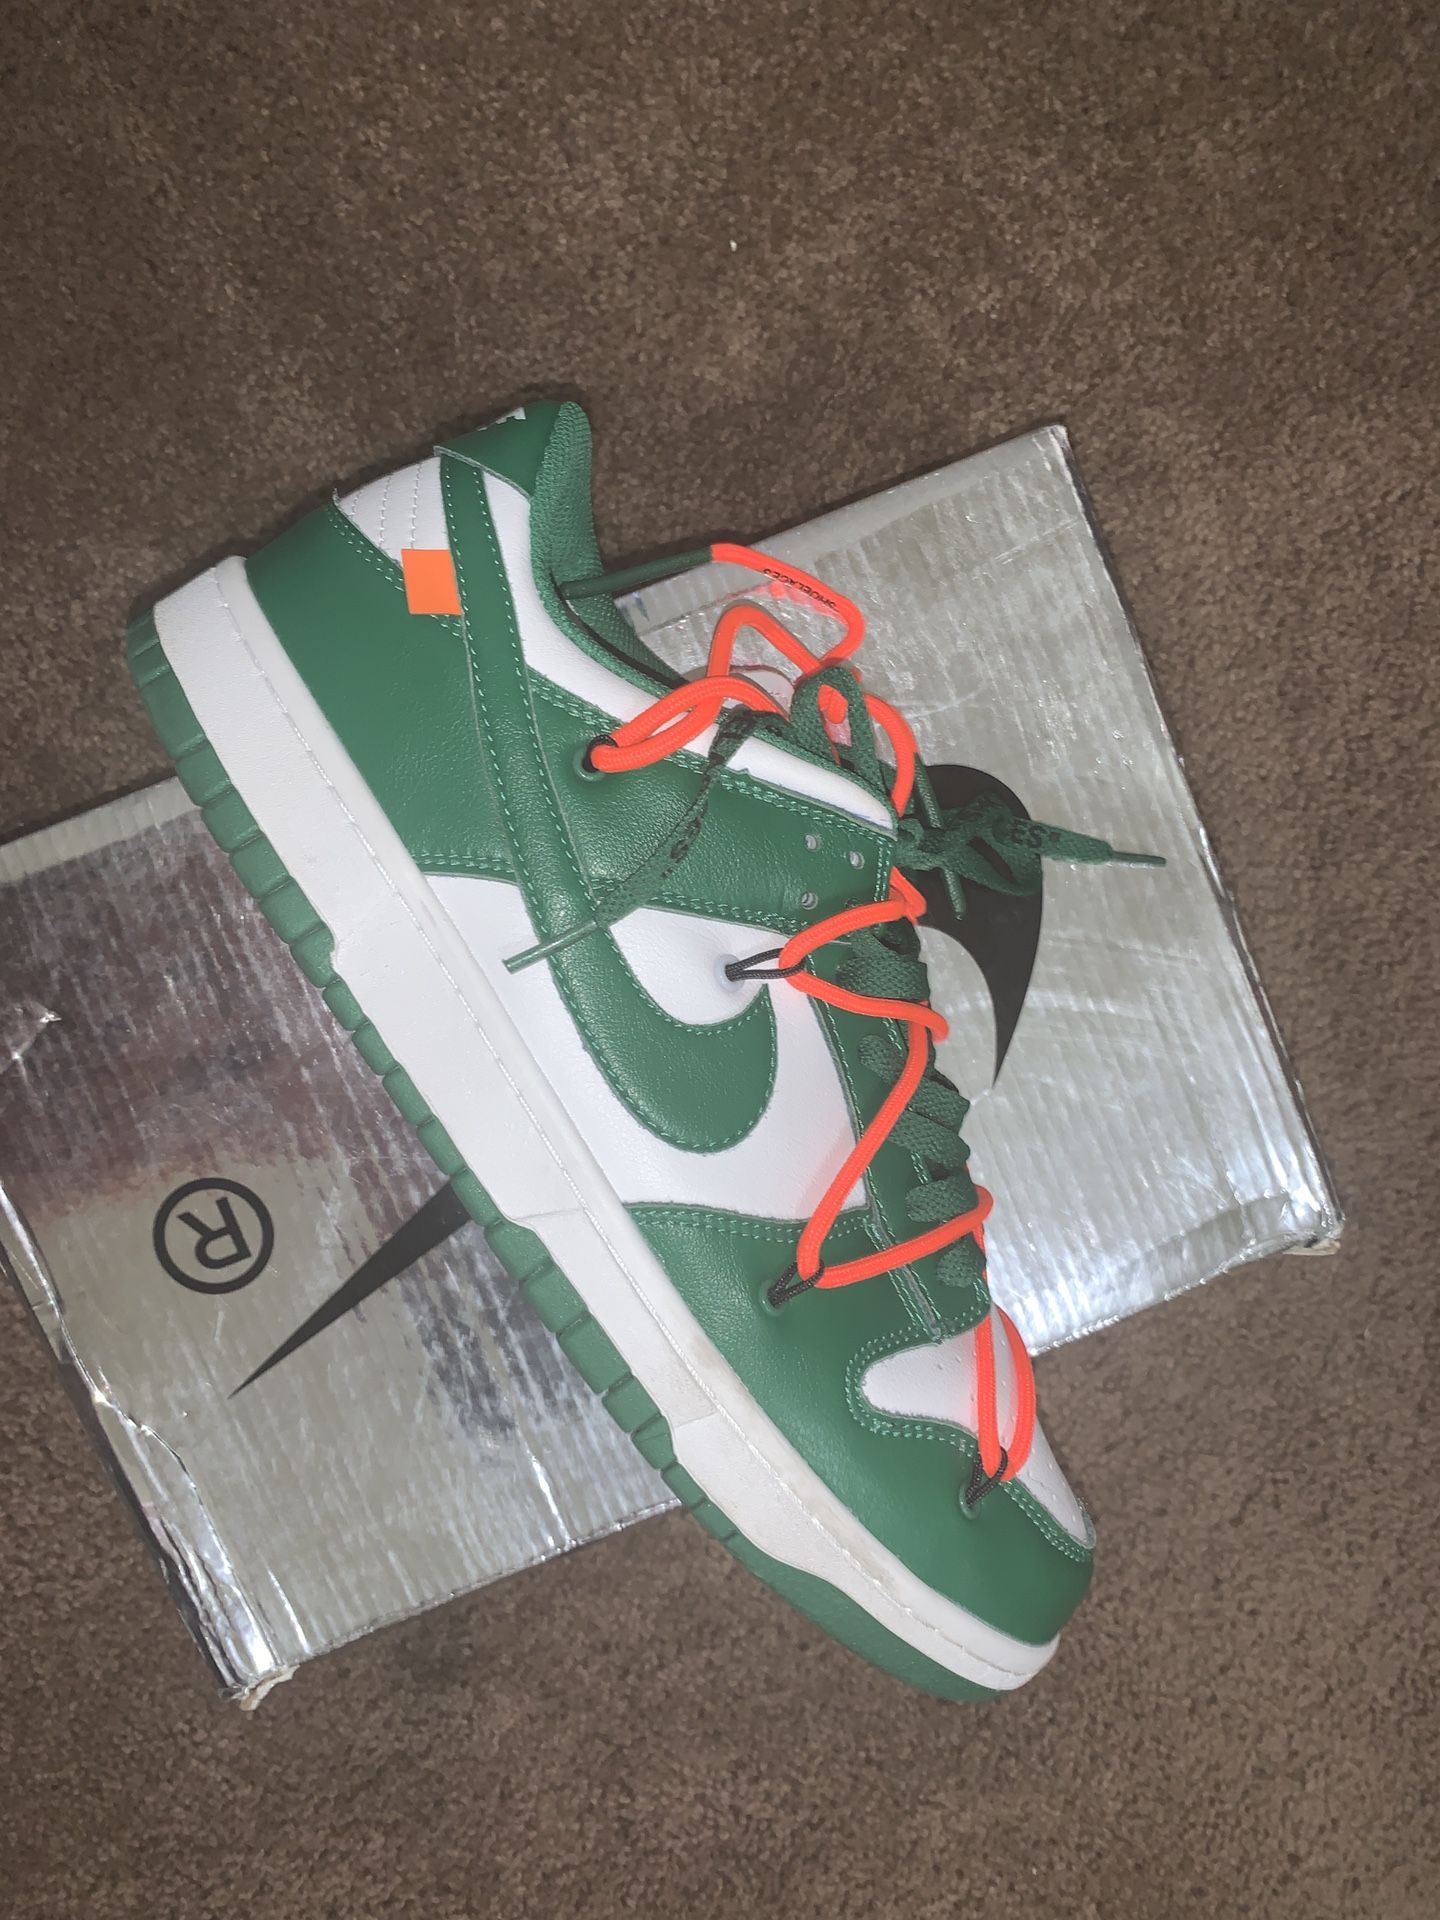 Off White Pine Green Dunk